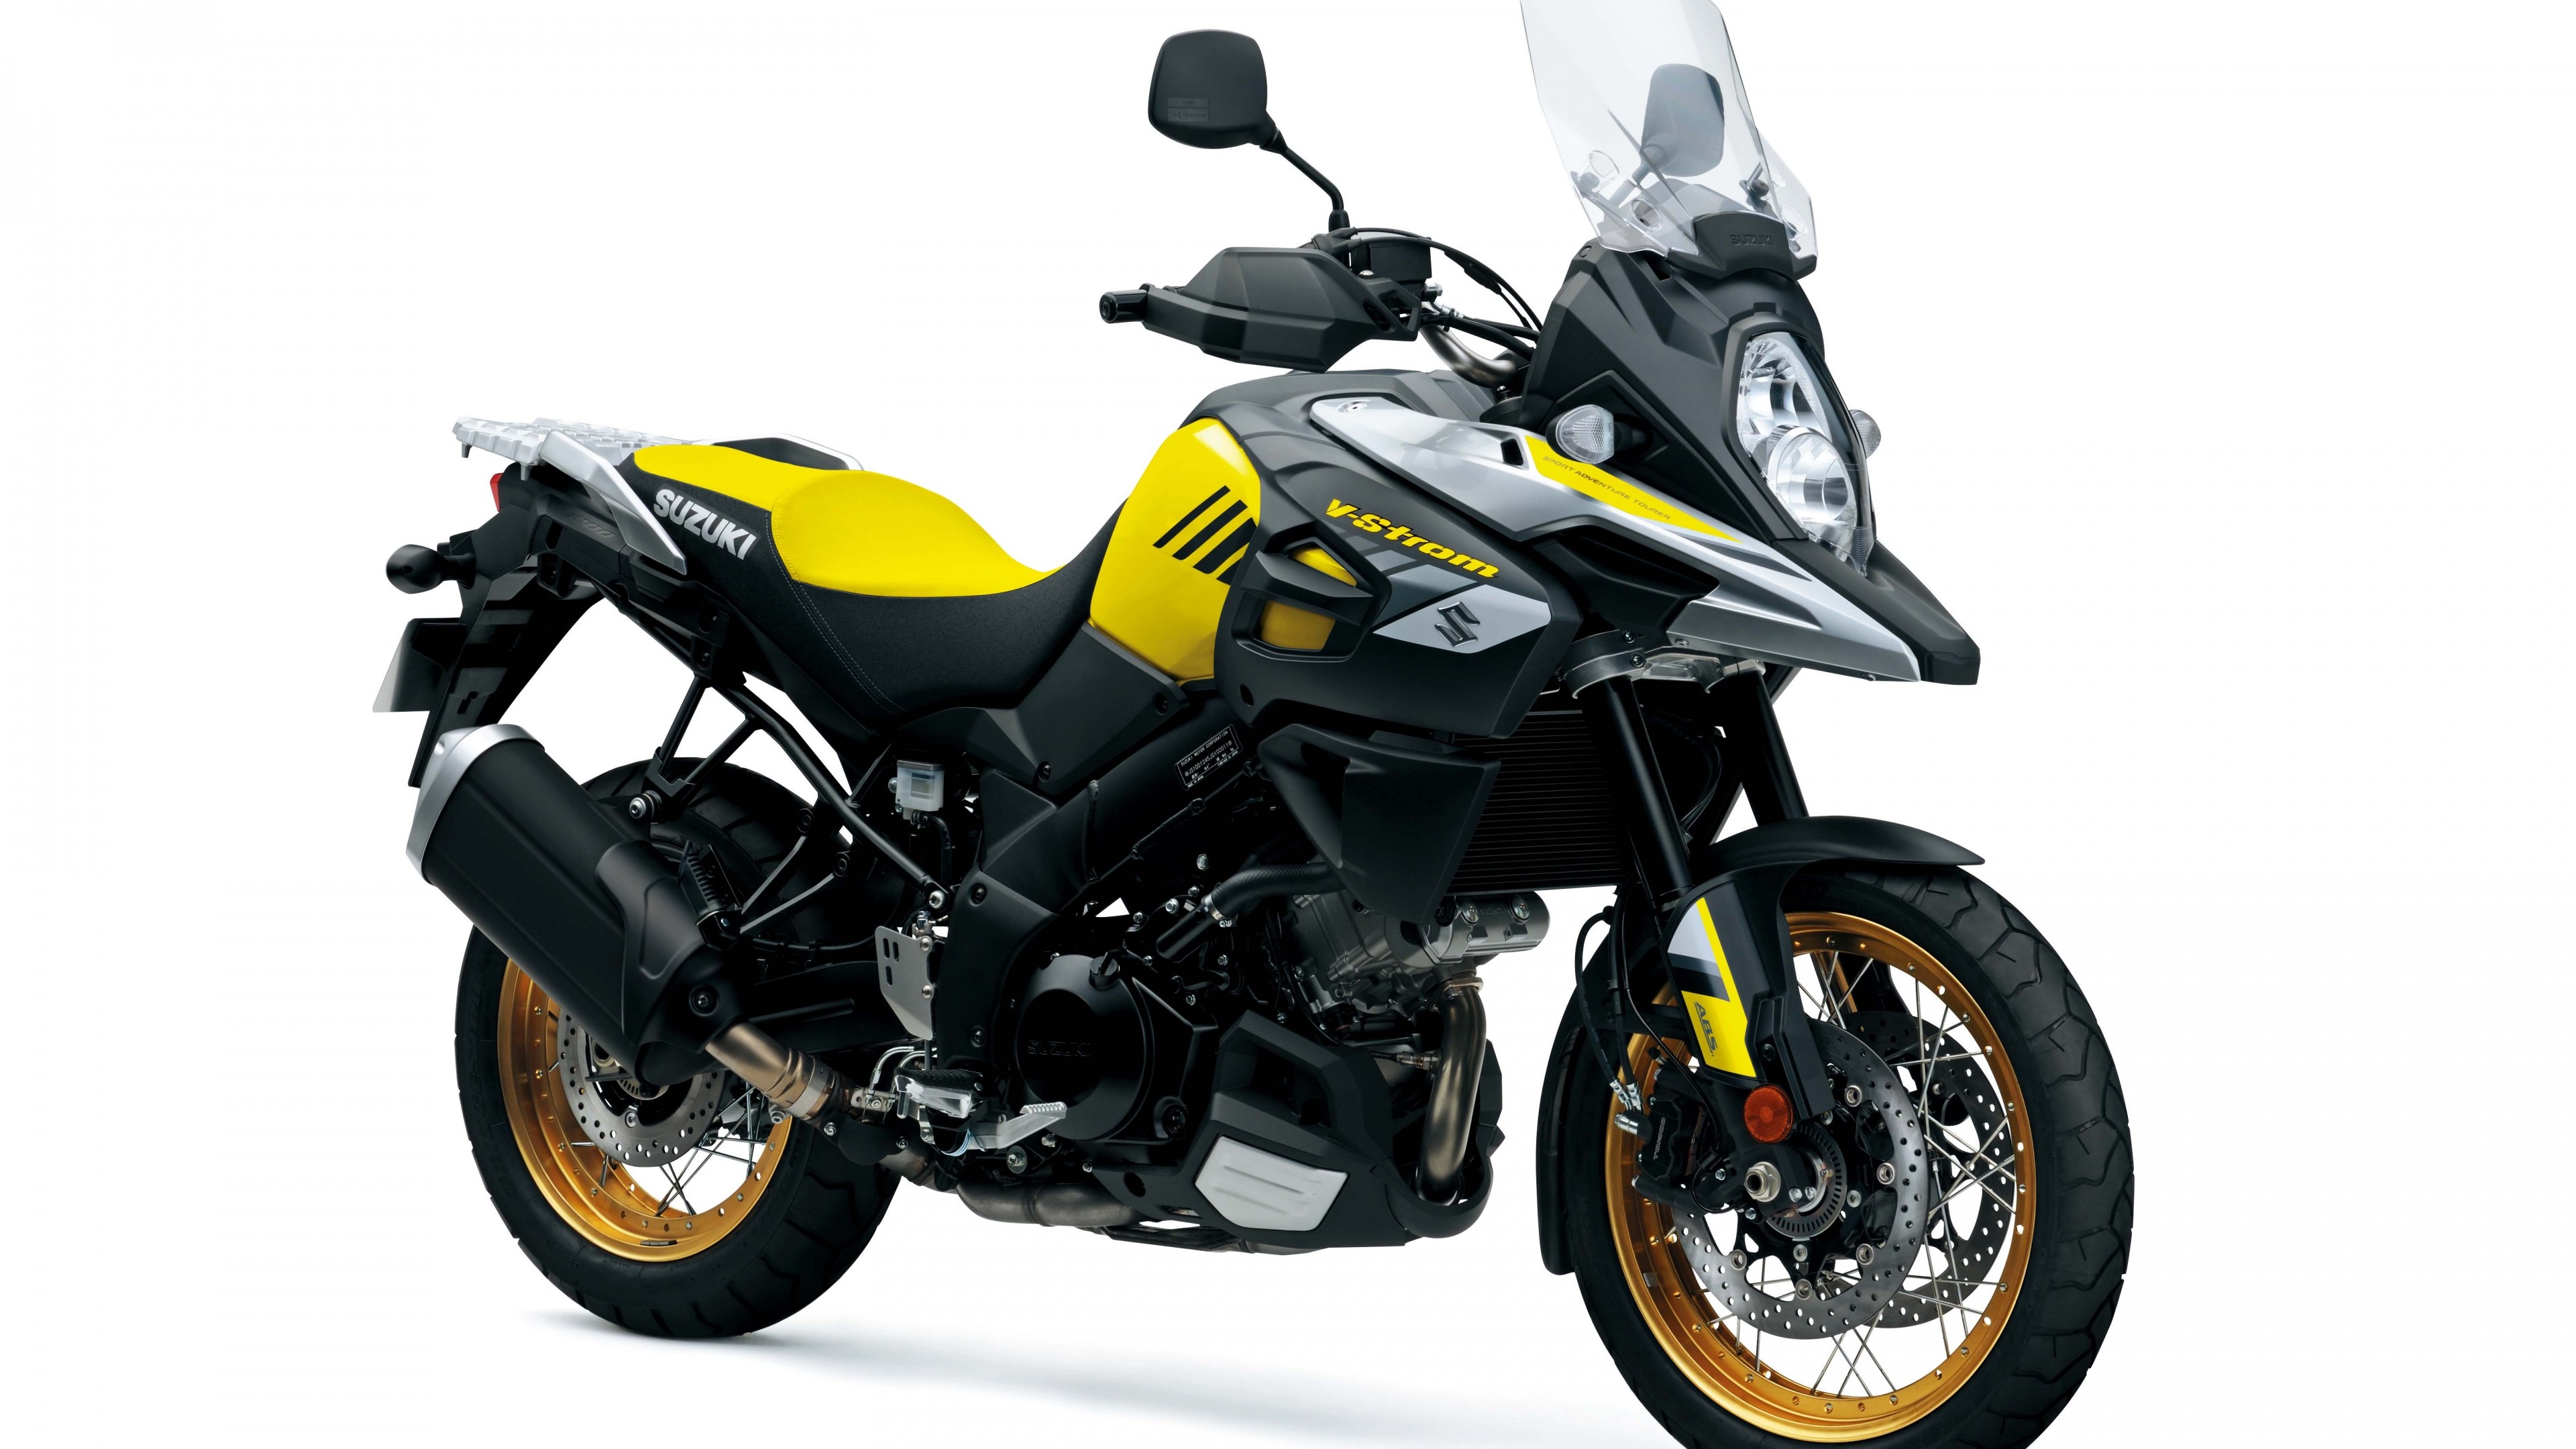 Suzuki V-Strom 650, Adventure motorcycle, Versatile and capable, On-road and off-road, 3840x2160 4K Desktop